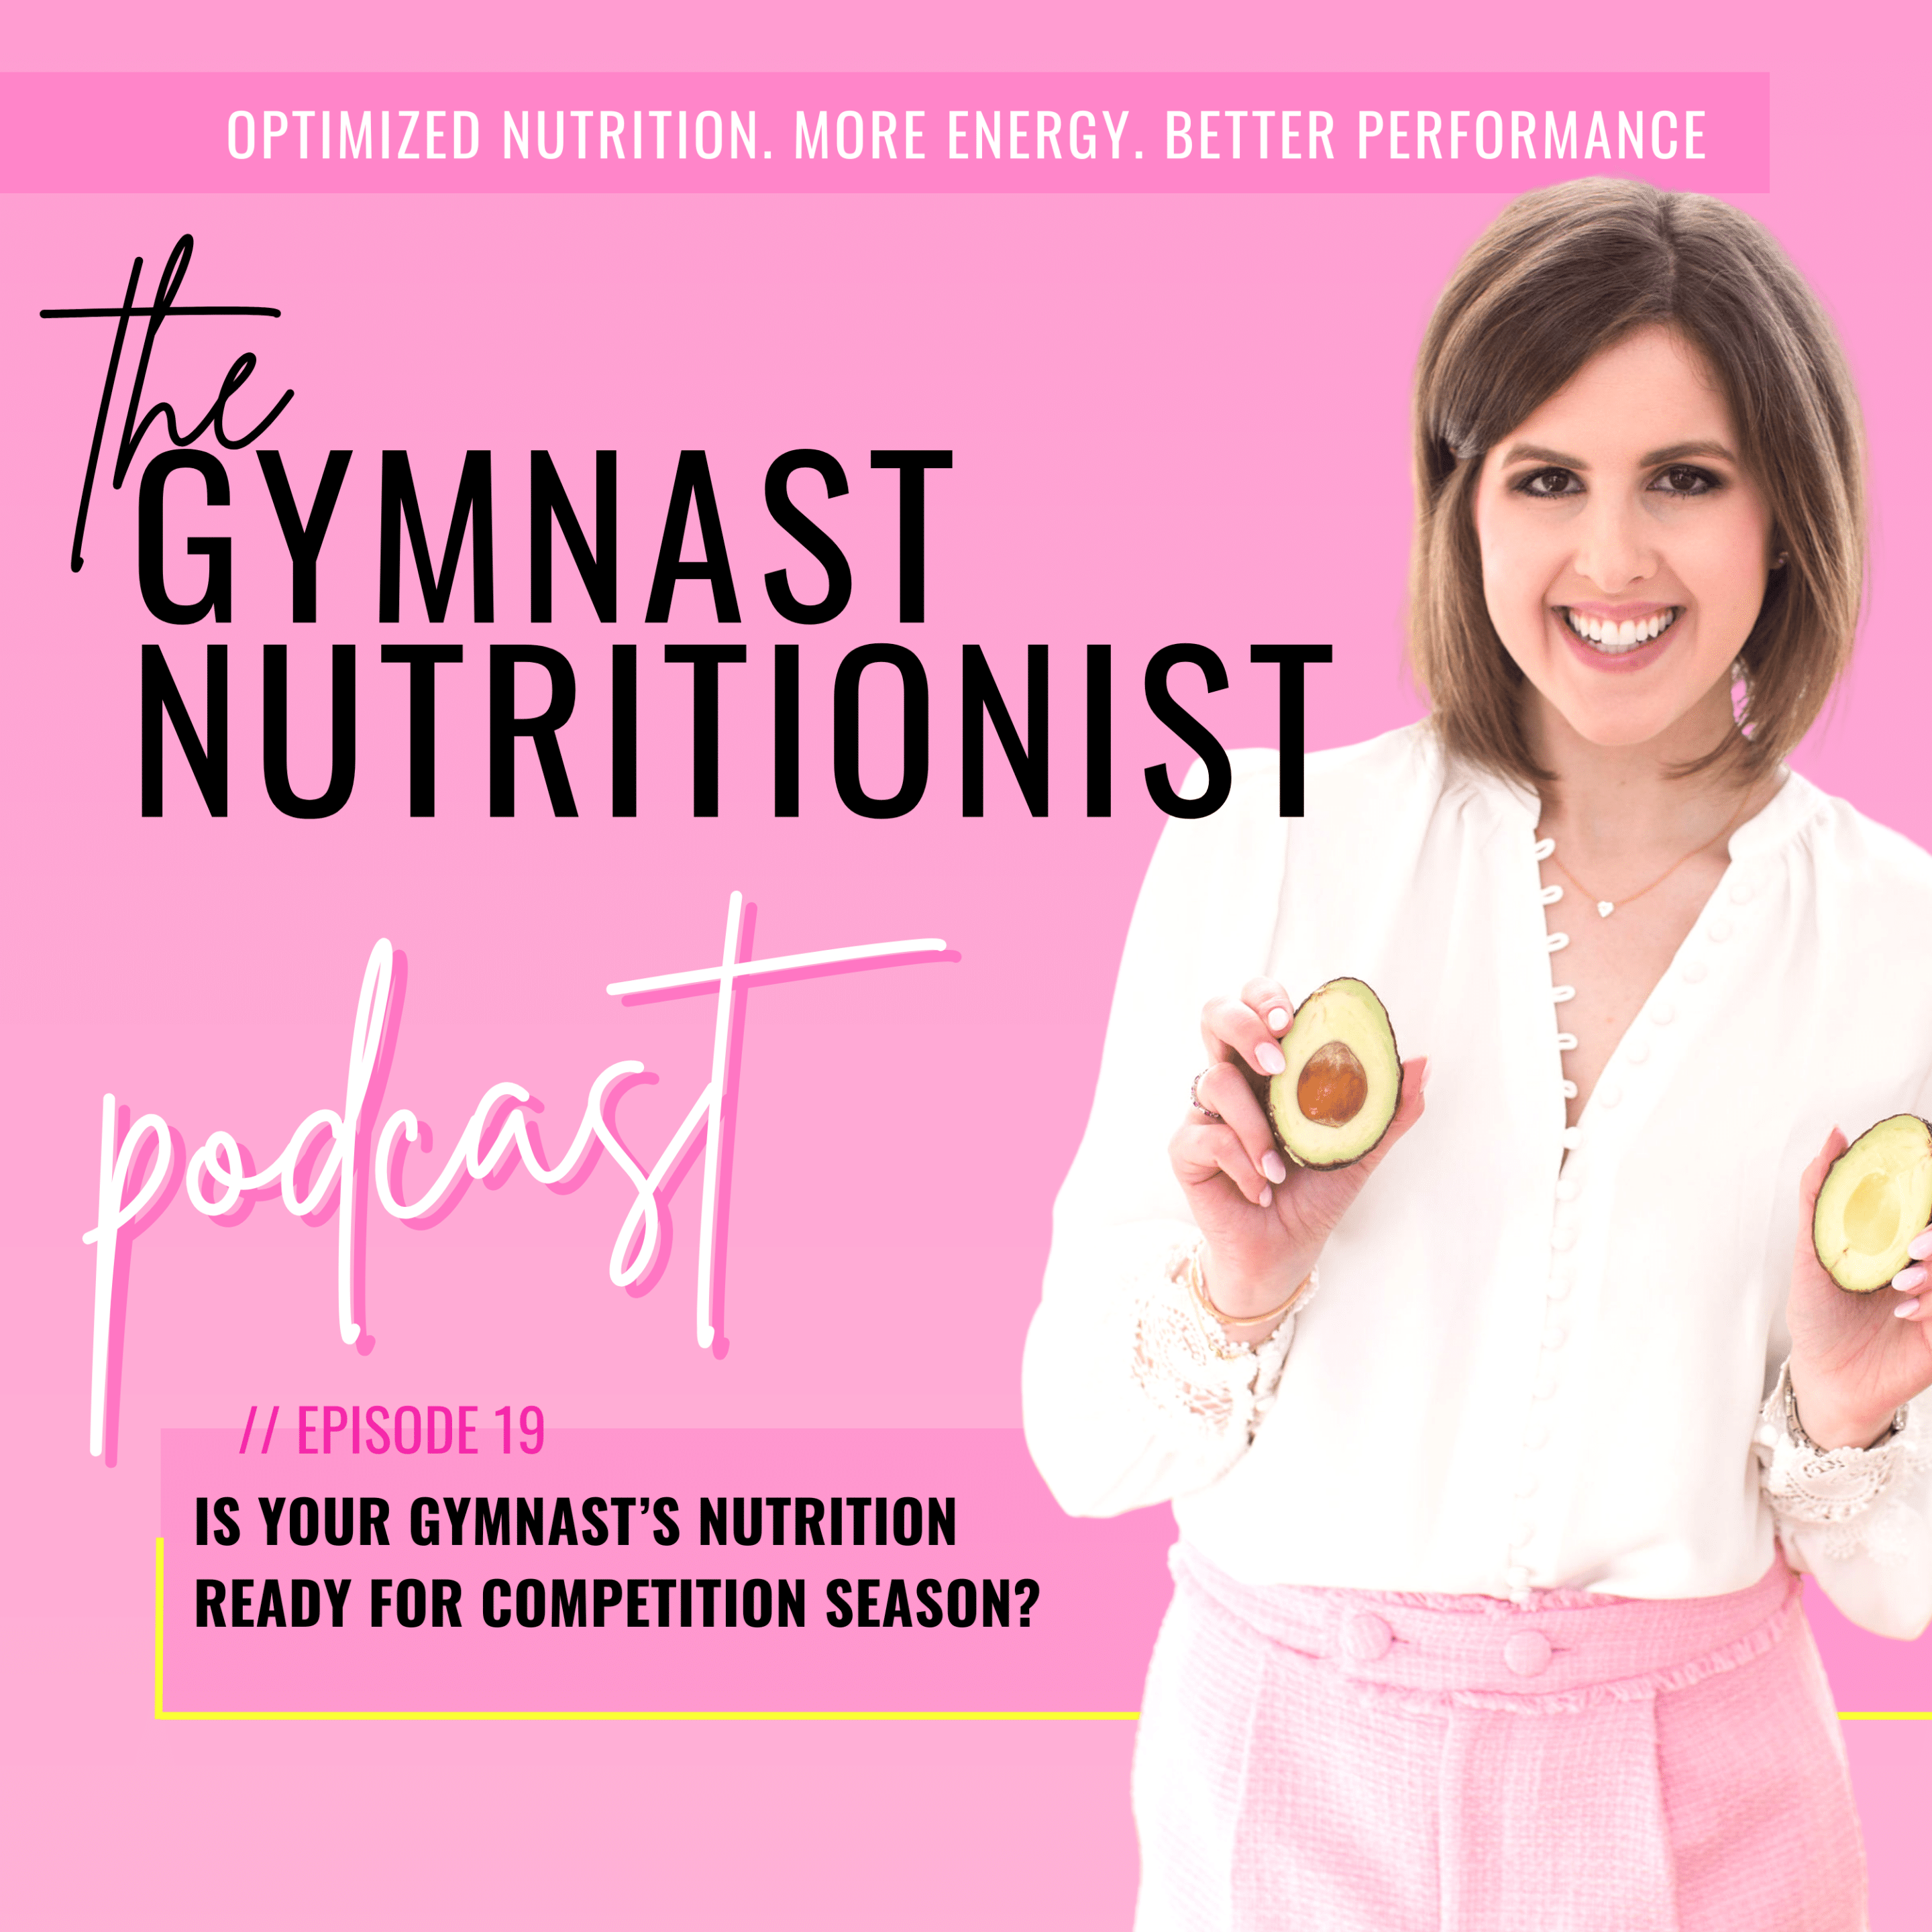 Episode 19: Is Your Gymnast Ready for Competition Season?